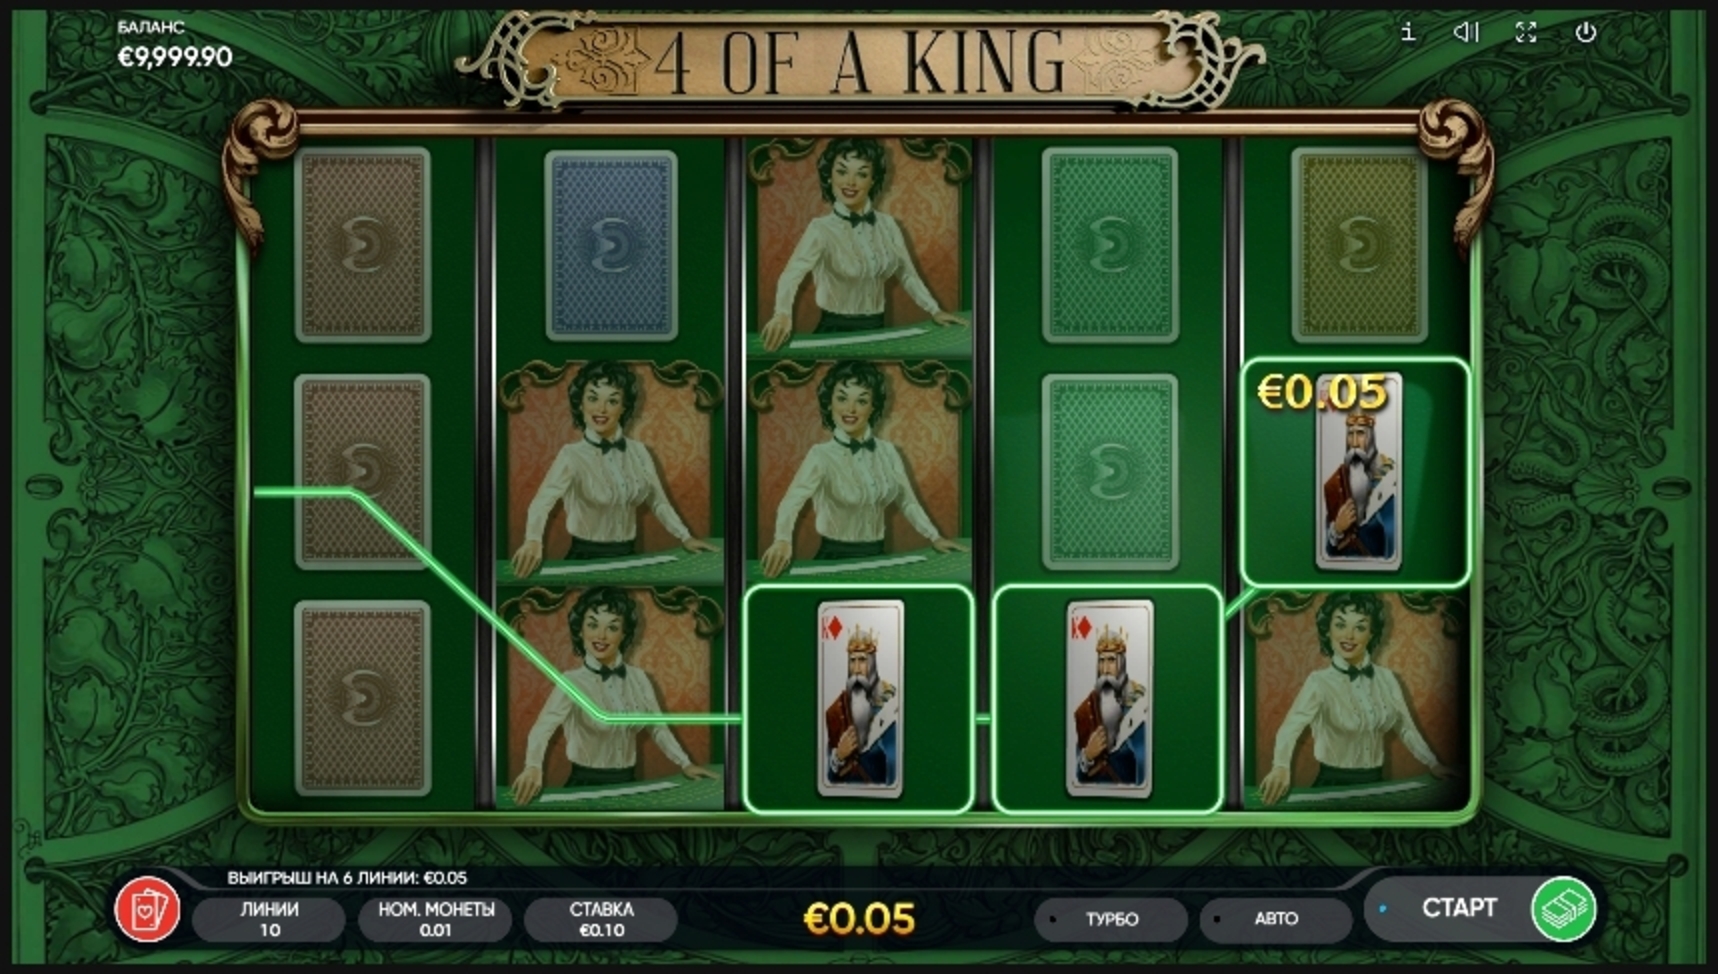 Win Money in 4 of the King Free Slot Game by Endorphina